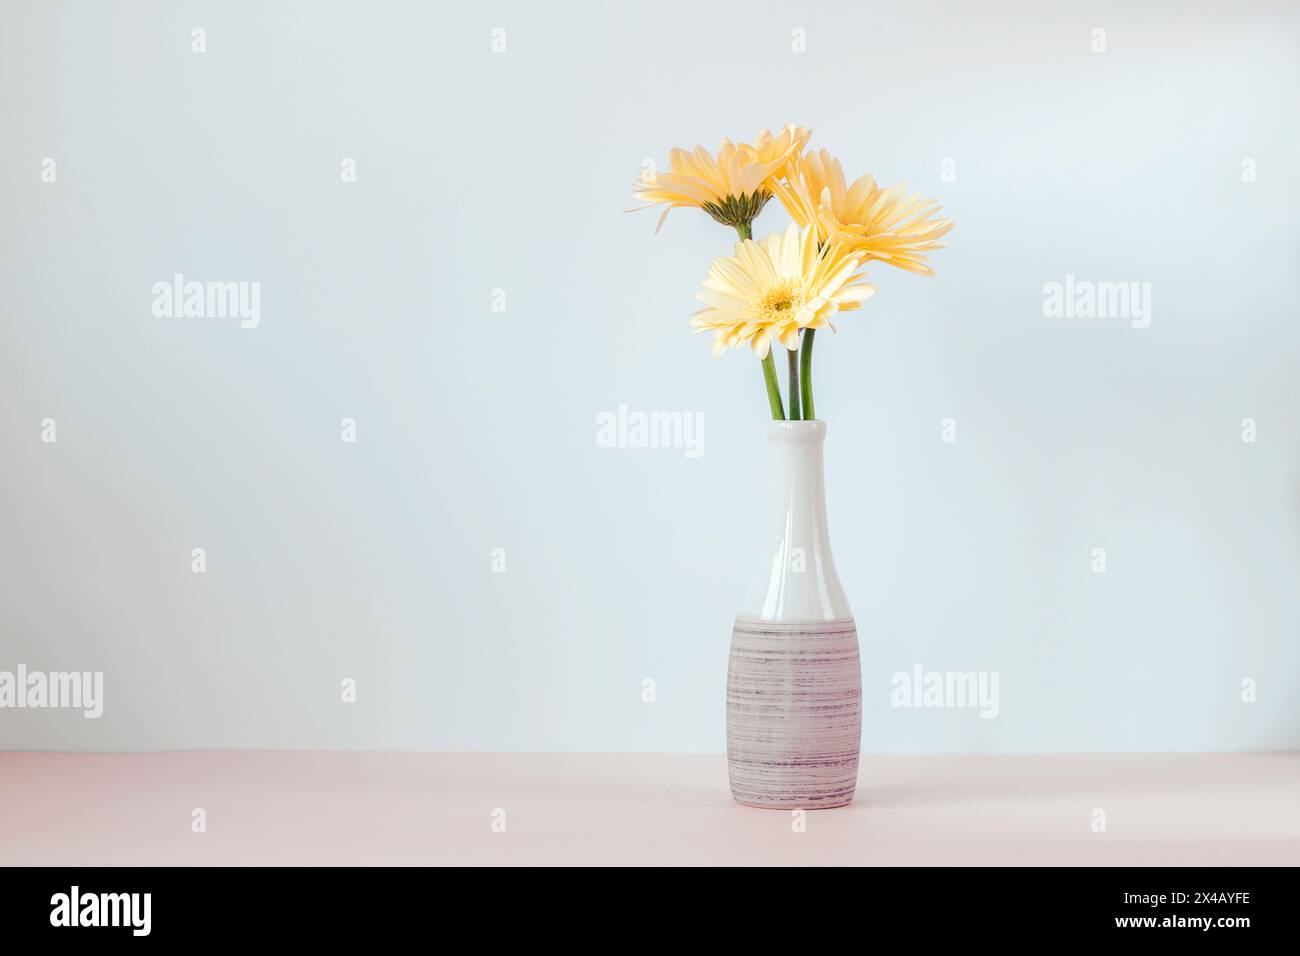 Yellow gerbera daisy flowers in vase against white wall. Copy space. Stock Photo